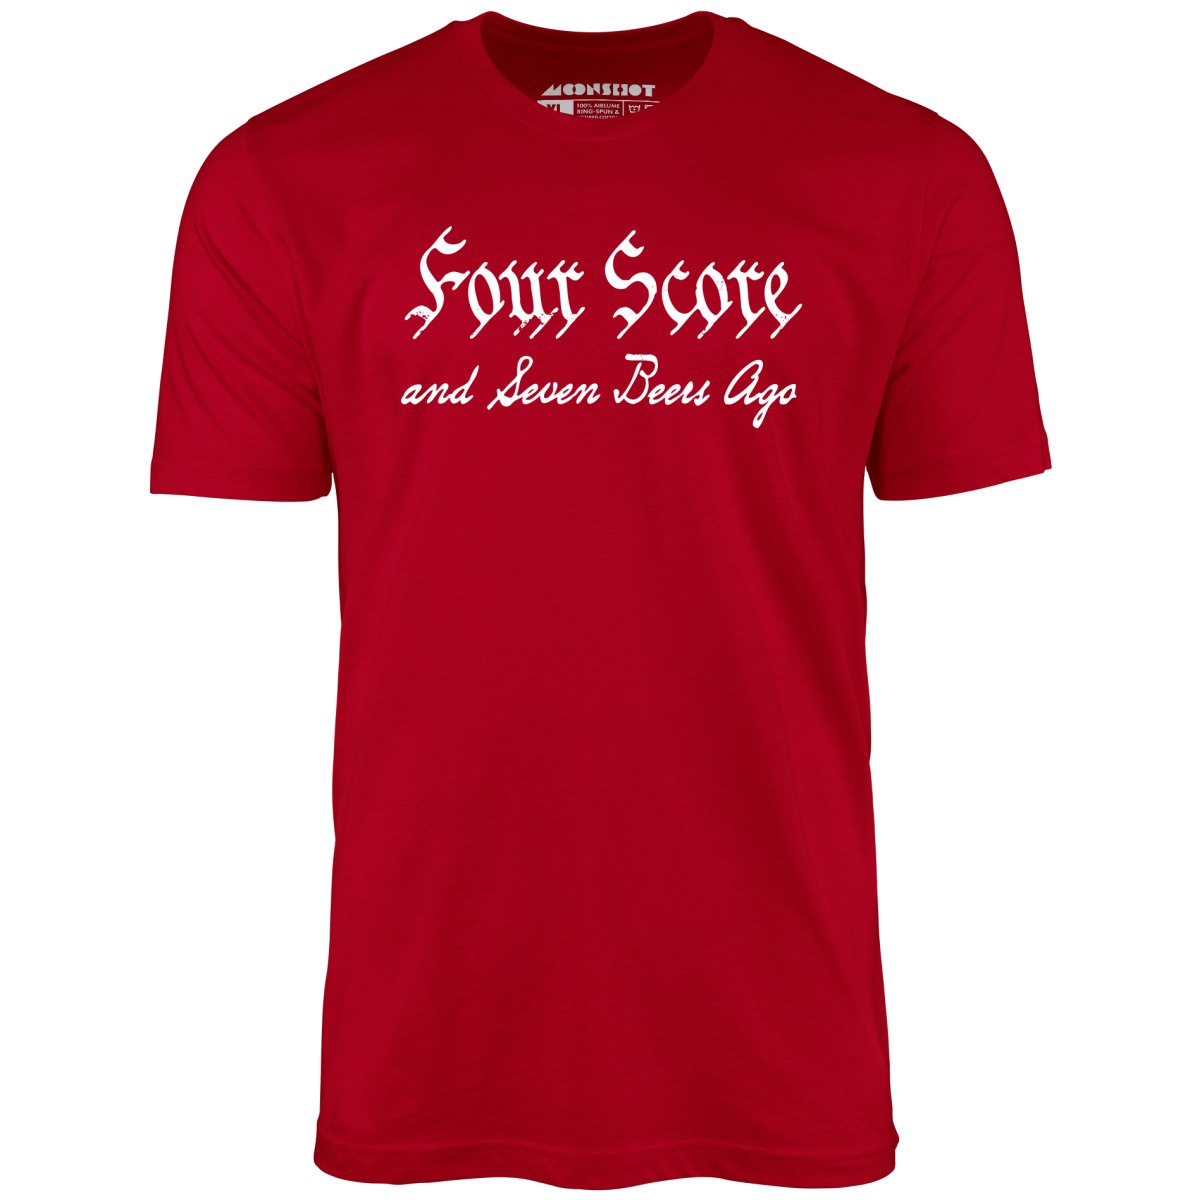 Four Score and Seven Beers Ago - Unisex T-Shirt